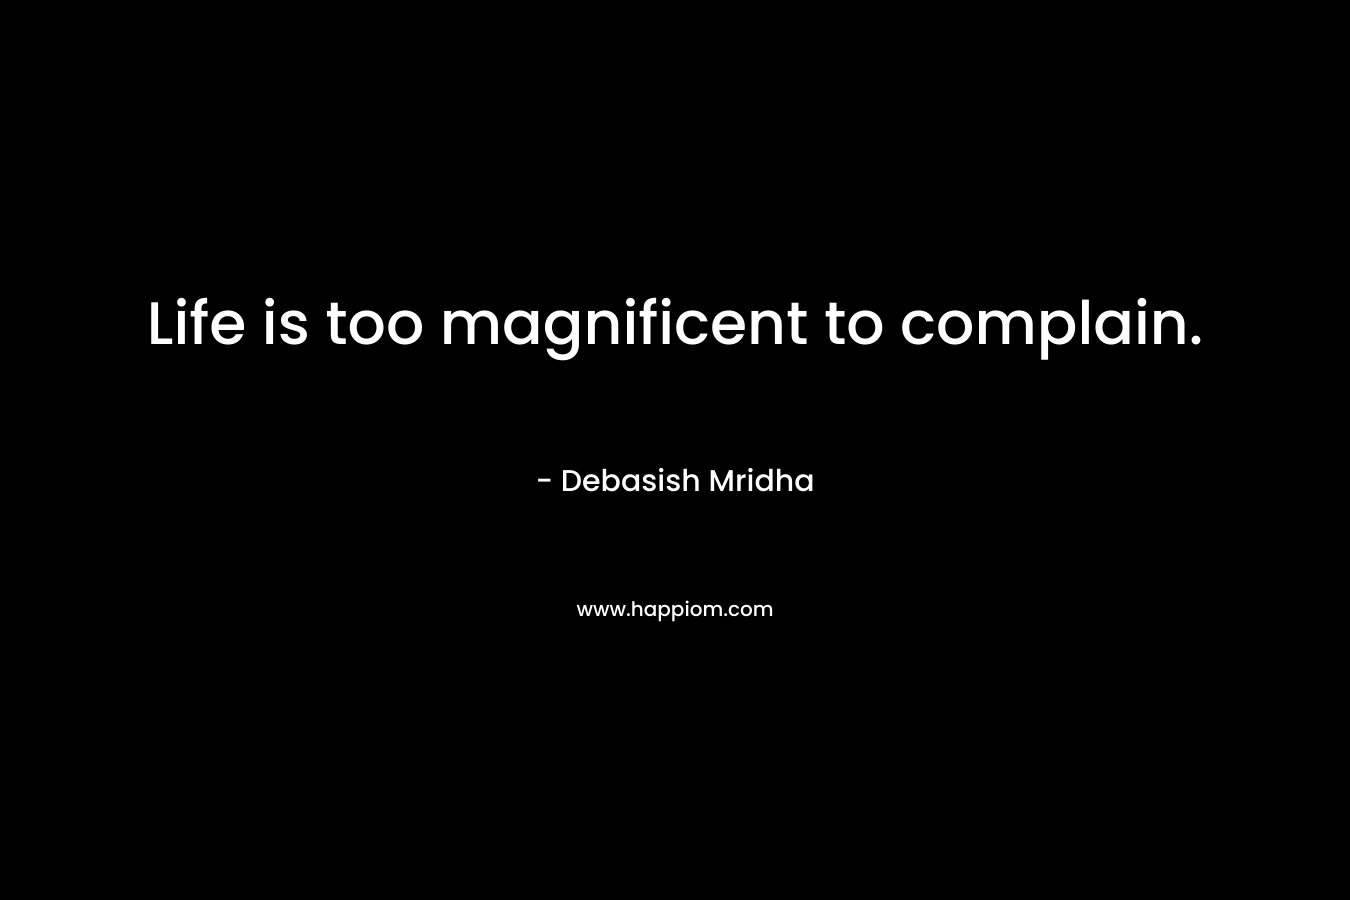 Life is too magnificent to complain.